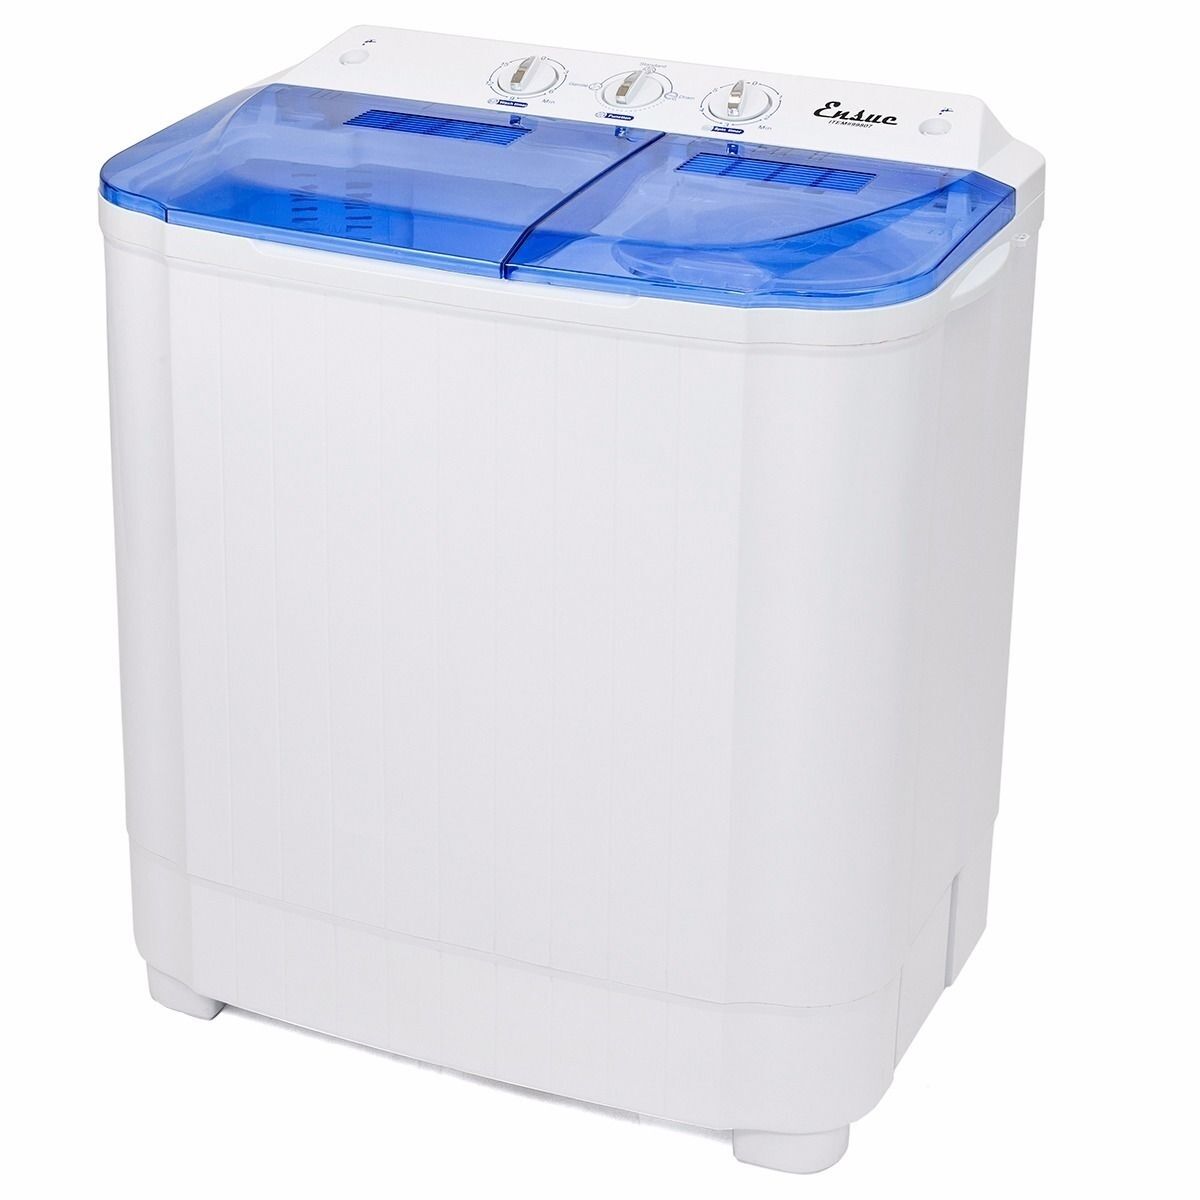 Portable Washer Machines Compact 8 - 9LB Washing Spin Dryer Laundry RV apartment